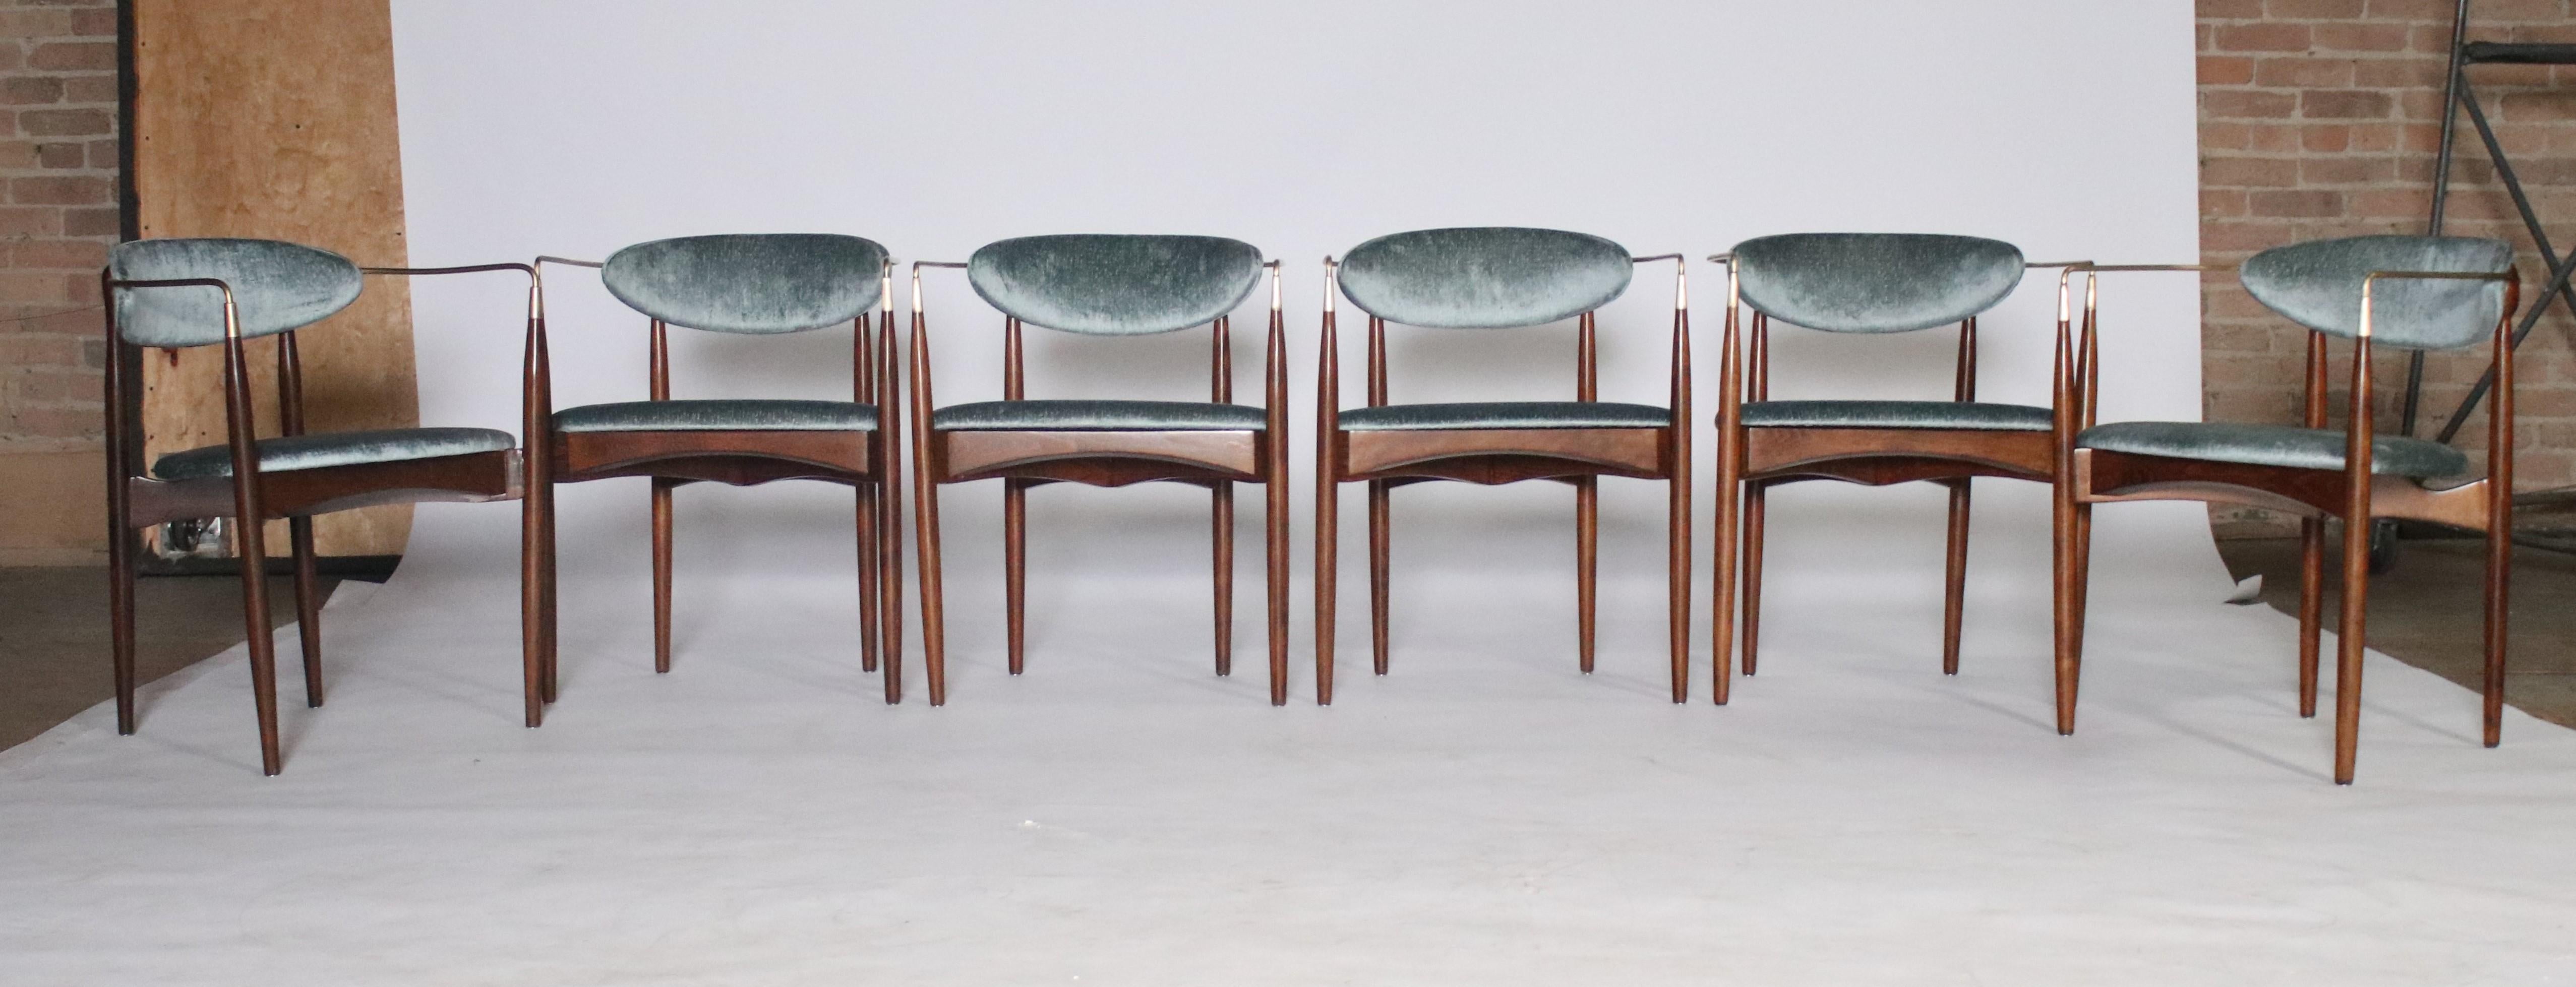 Set of 6 Viscount chairs designed by Dan Johnson all newly restored in walnut and brass details and upholstered in aqua velvet fabric.